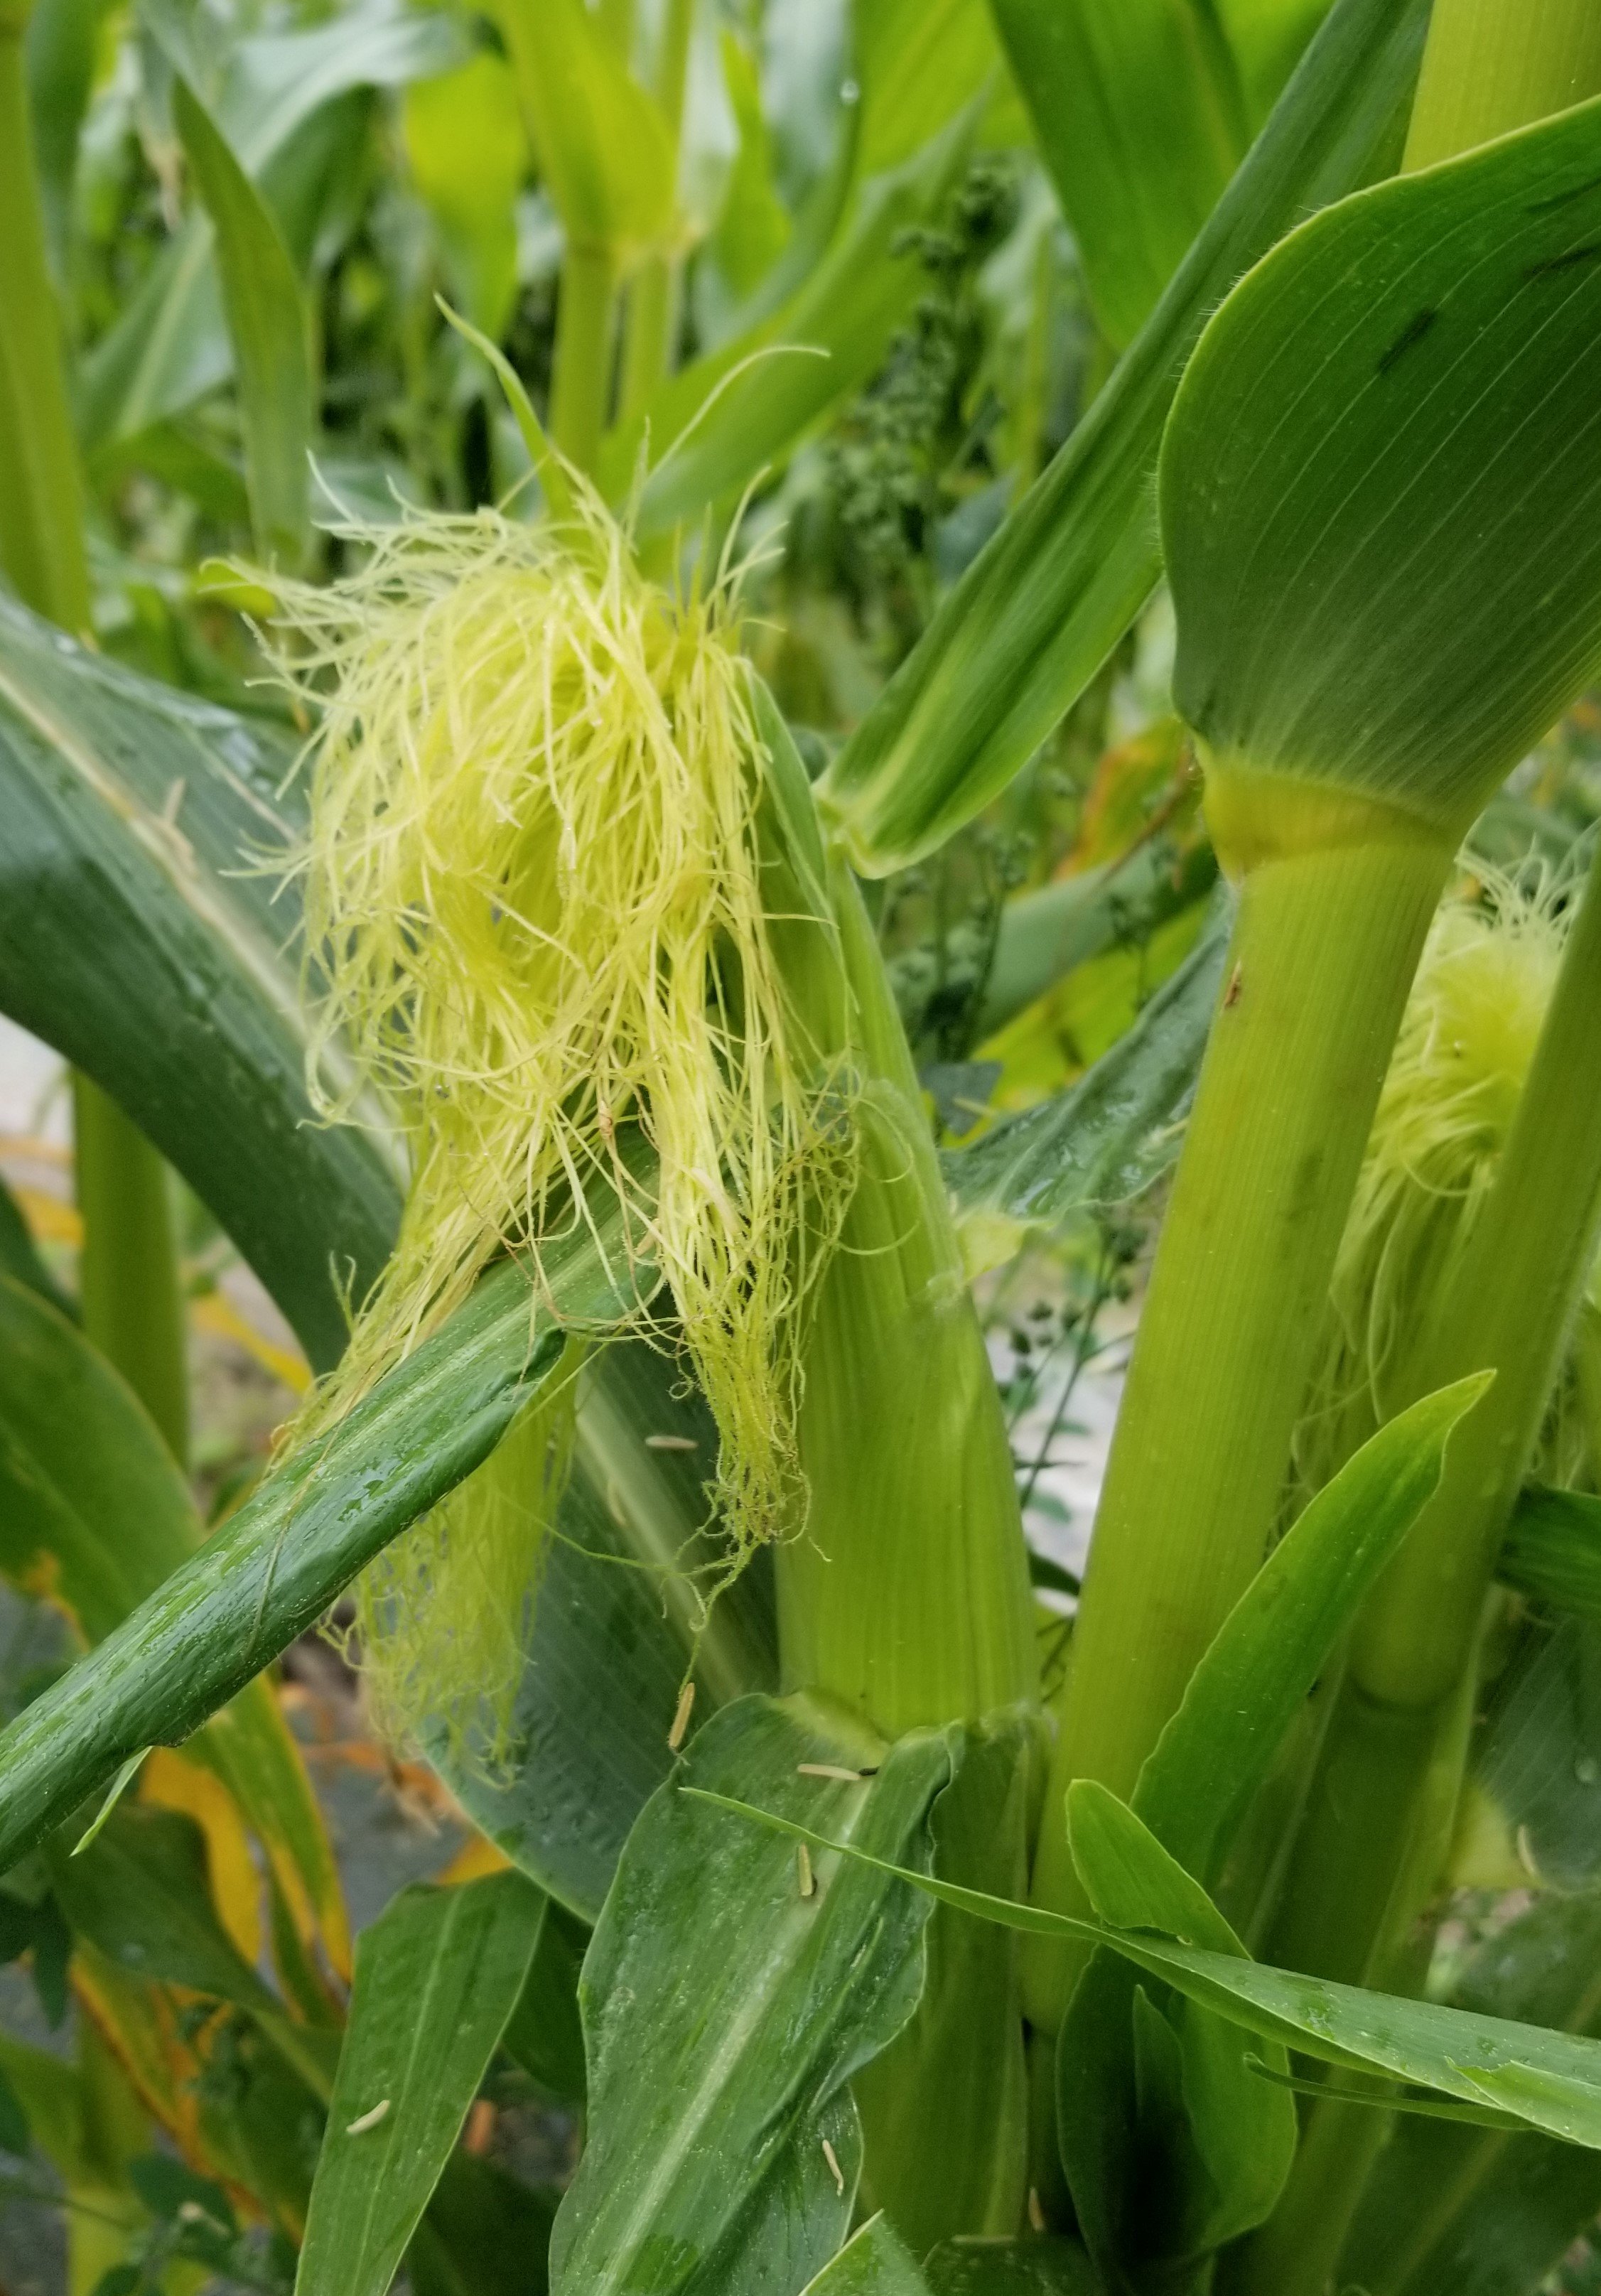 Previous Happening: Corn slowly coming